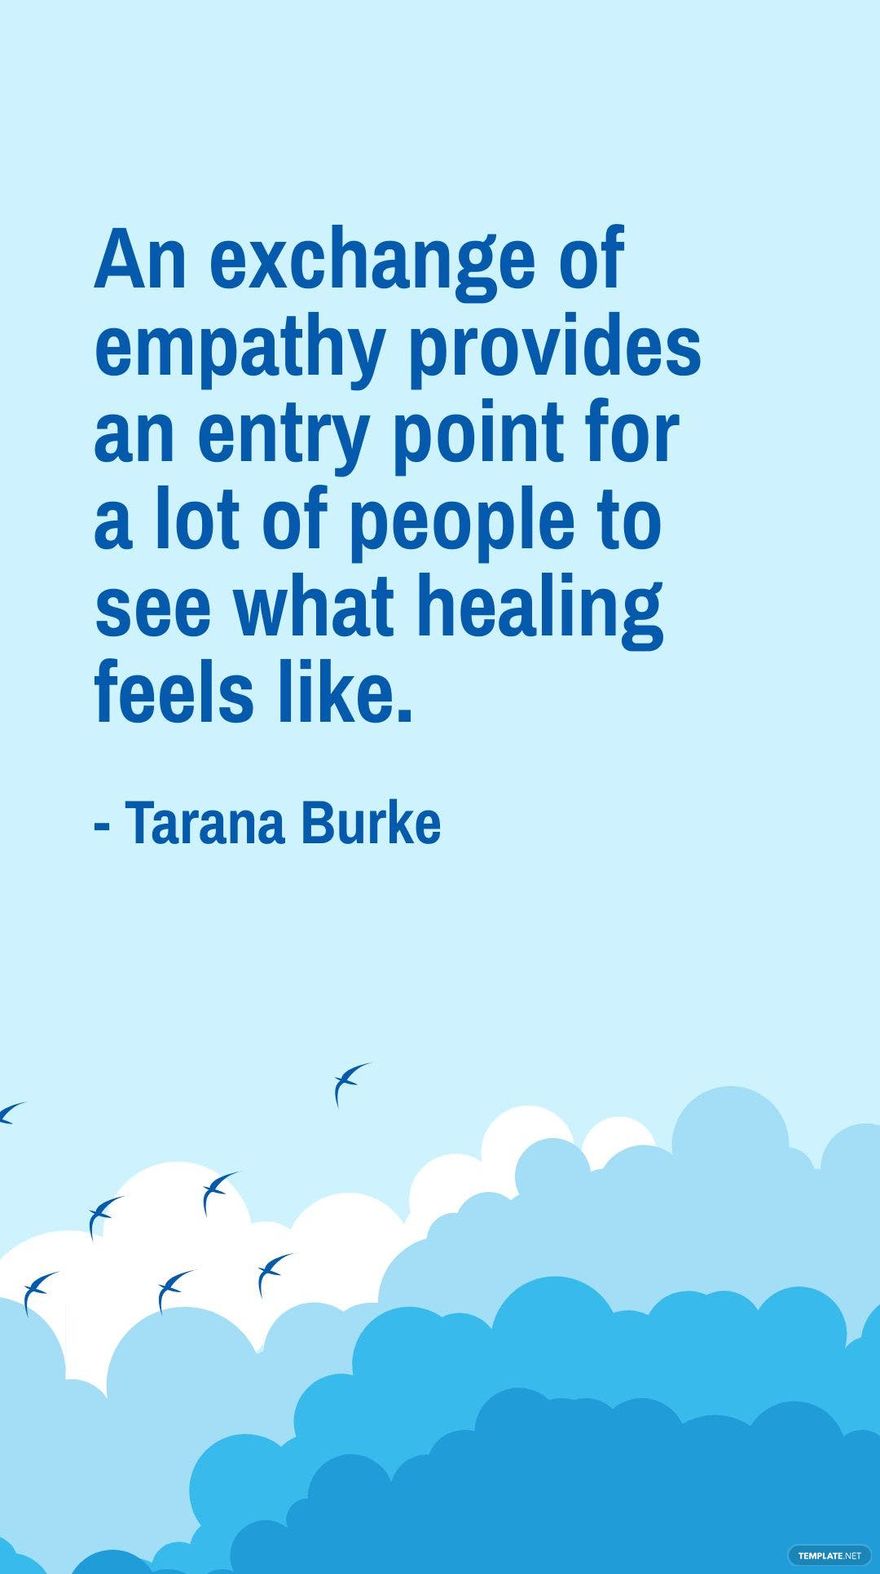 Tarana Burke - An exchange of empathy provides an entry point for a lot of people to see what healing feels like. in JPG